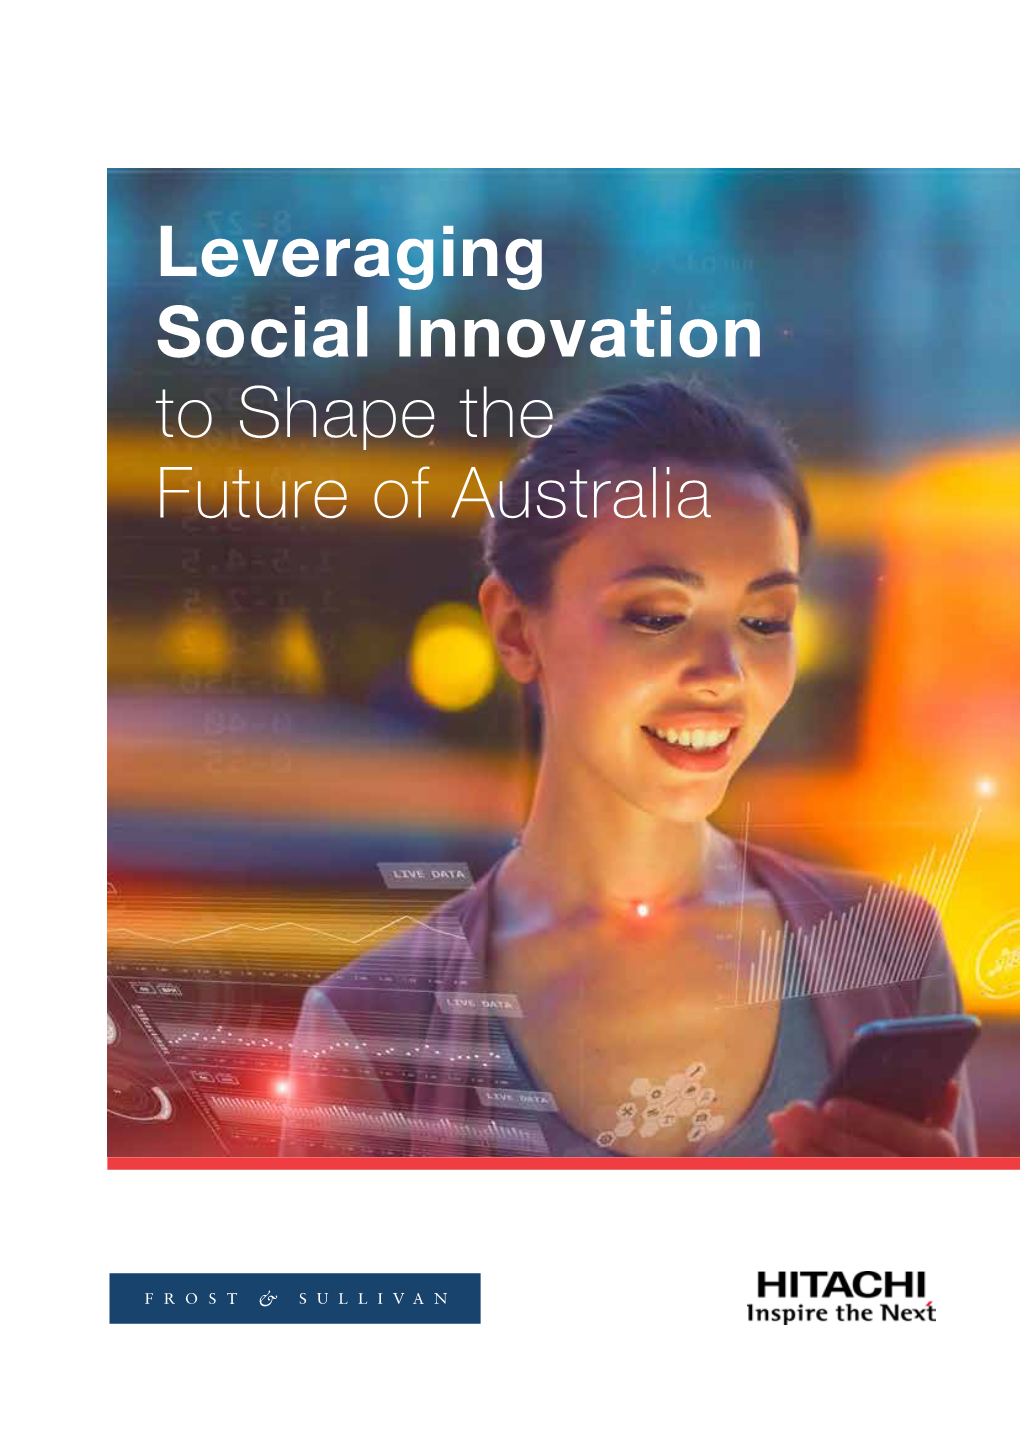 Leveraging Social Innovation to Shape the Future of Australia Contents